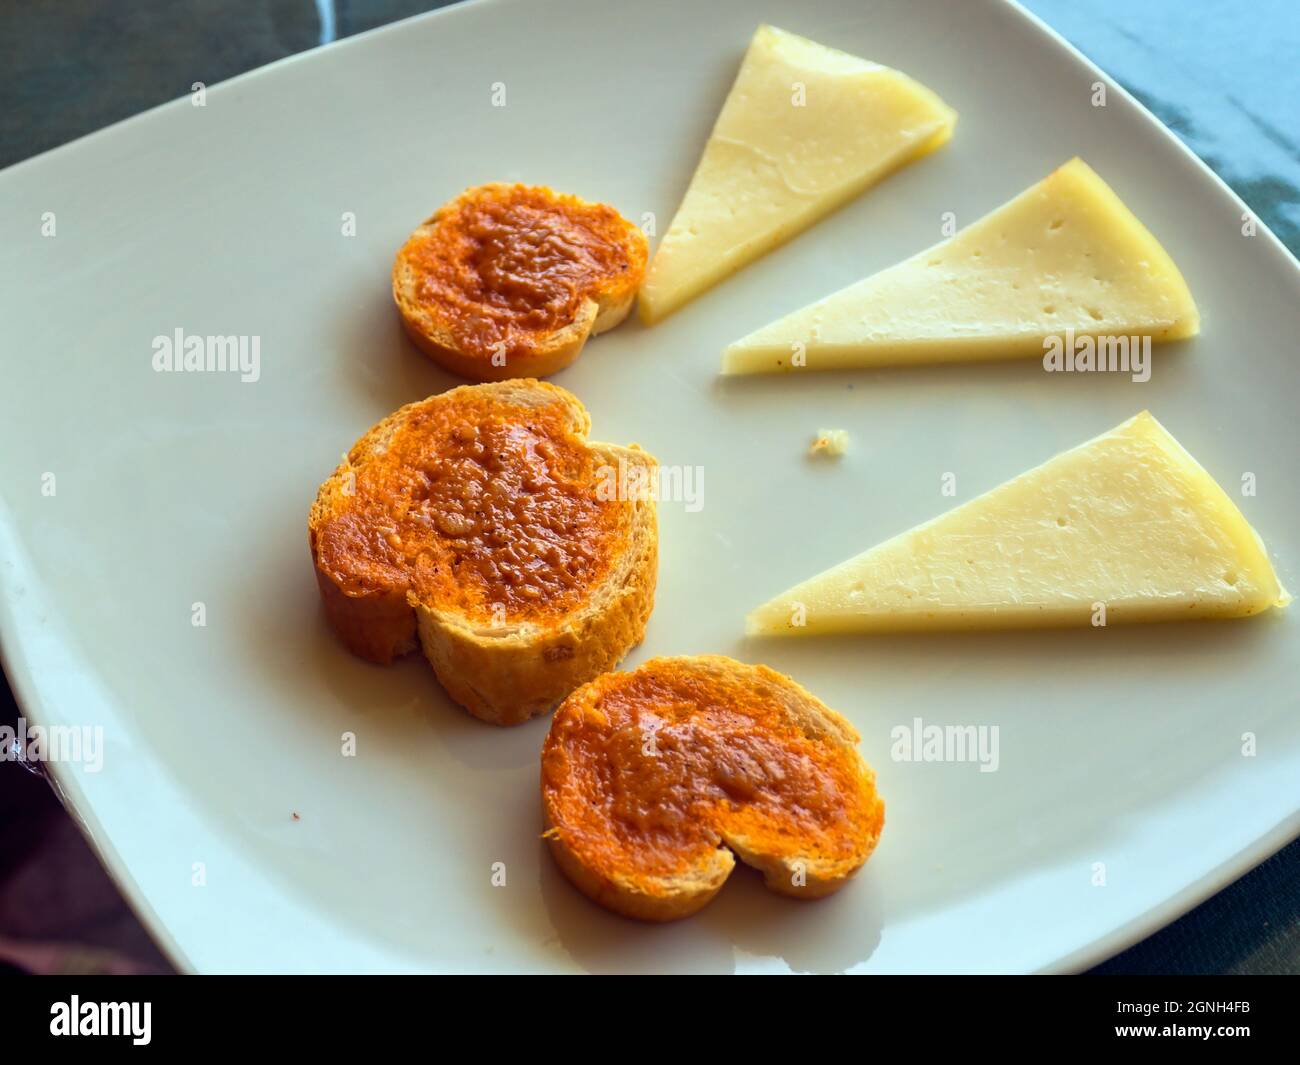 Overhead view of a white plate with three Tapas. Three round small toasts with red Canarian sauce (mojo) and three pieces of cheese. Stock Photo